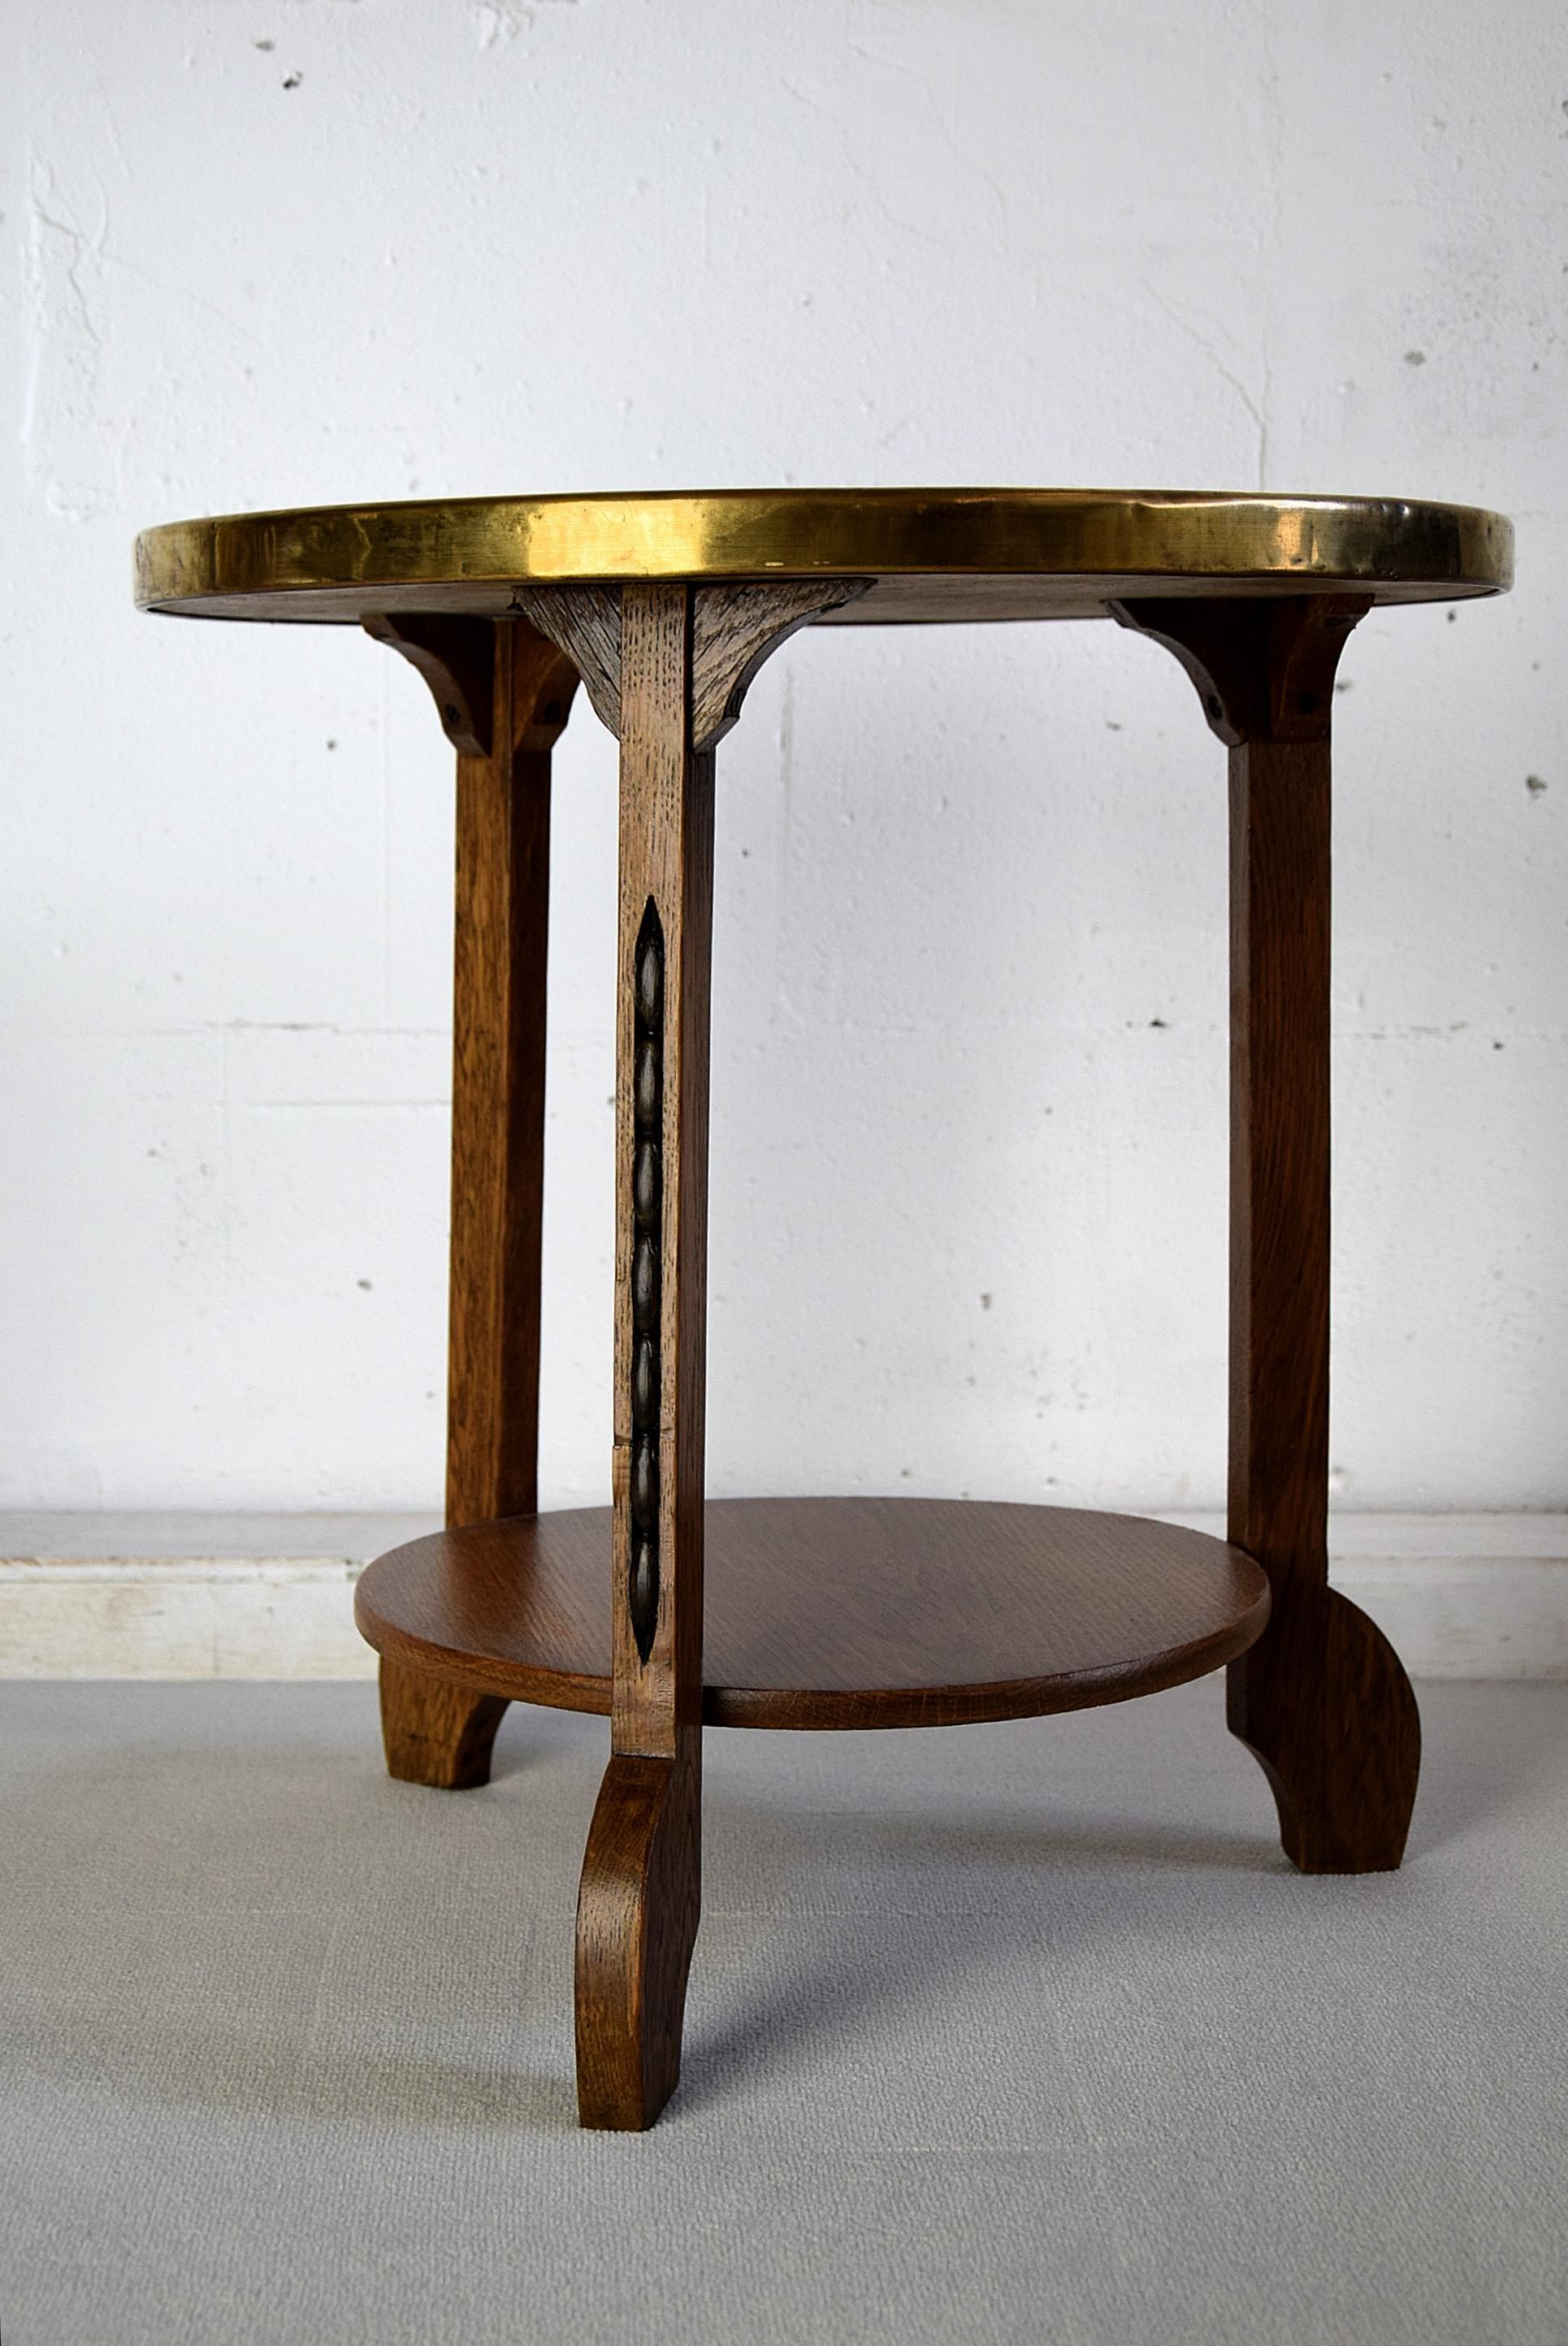 Rare 1920s Art Deco brass and oak side table with decorated brass top. This piece was produced in the Netherlands circa 1920. The table top was made in Persia and brought to the Netherlands by traders. Than the top was used by Artigiani who turned